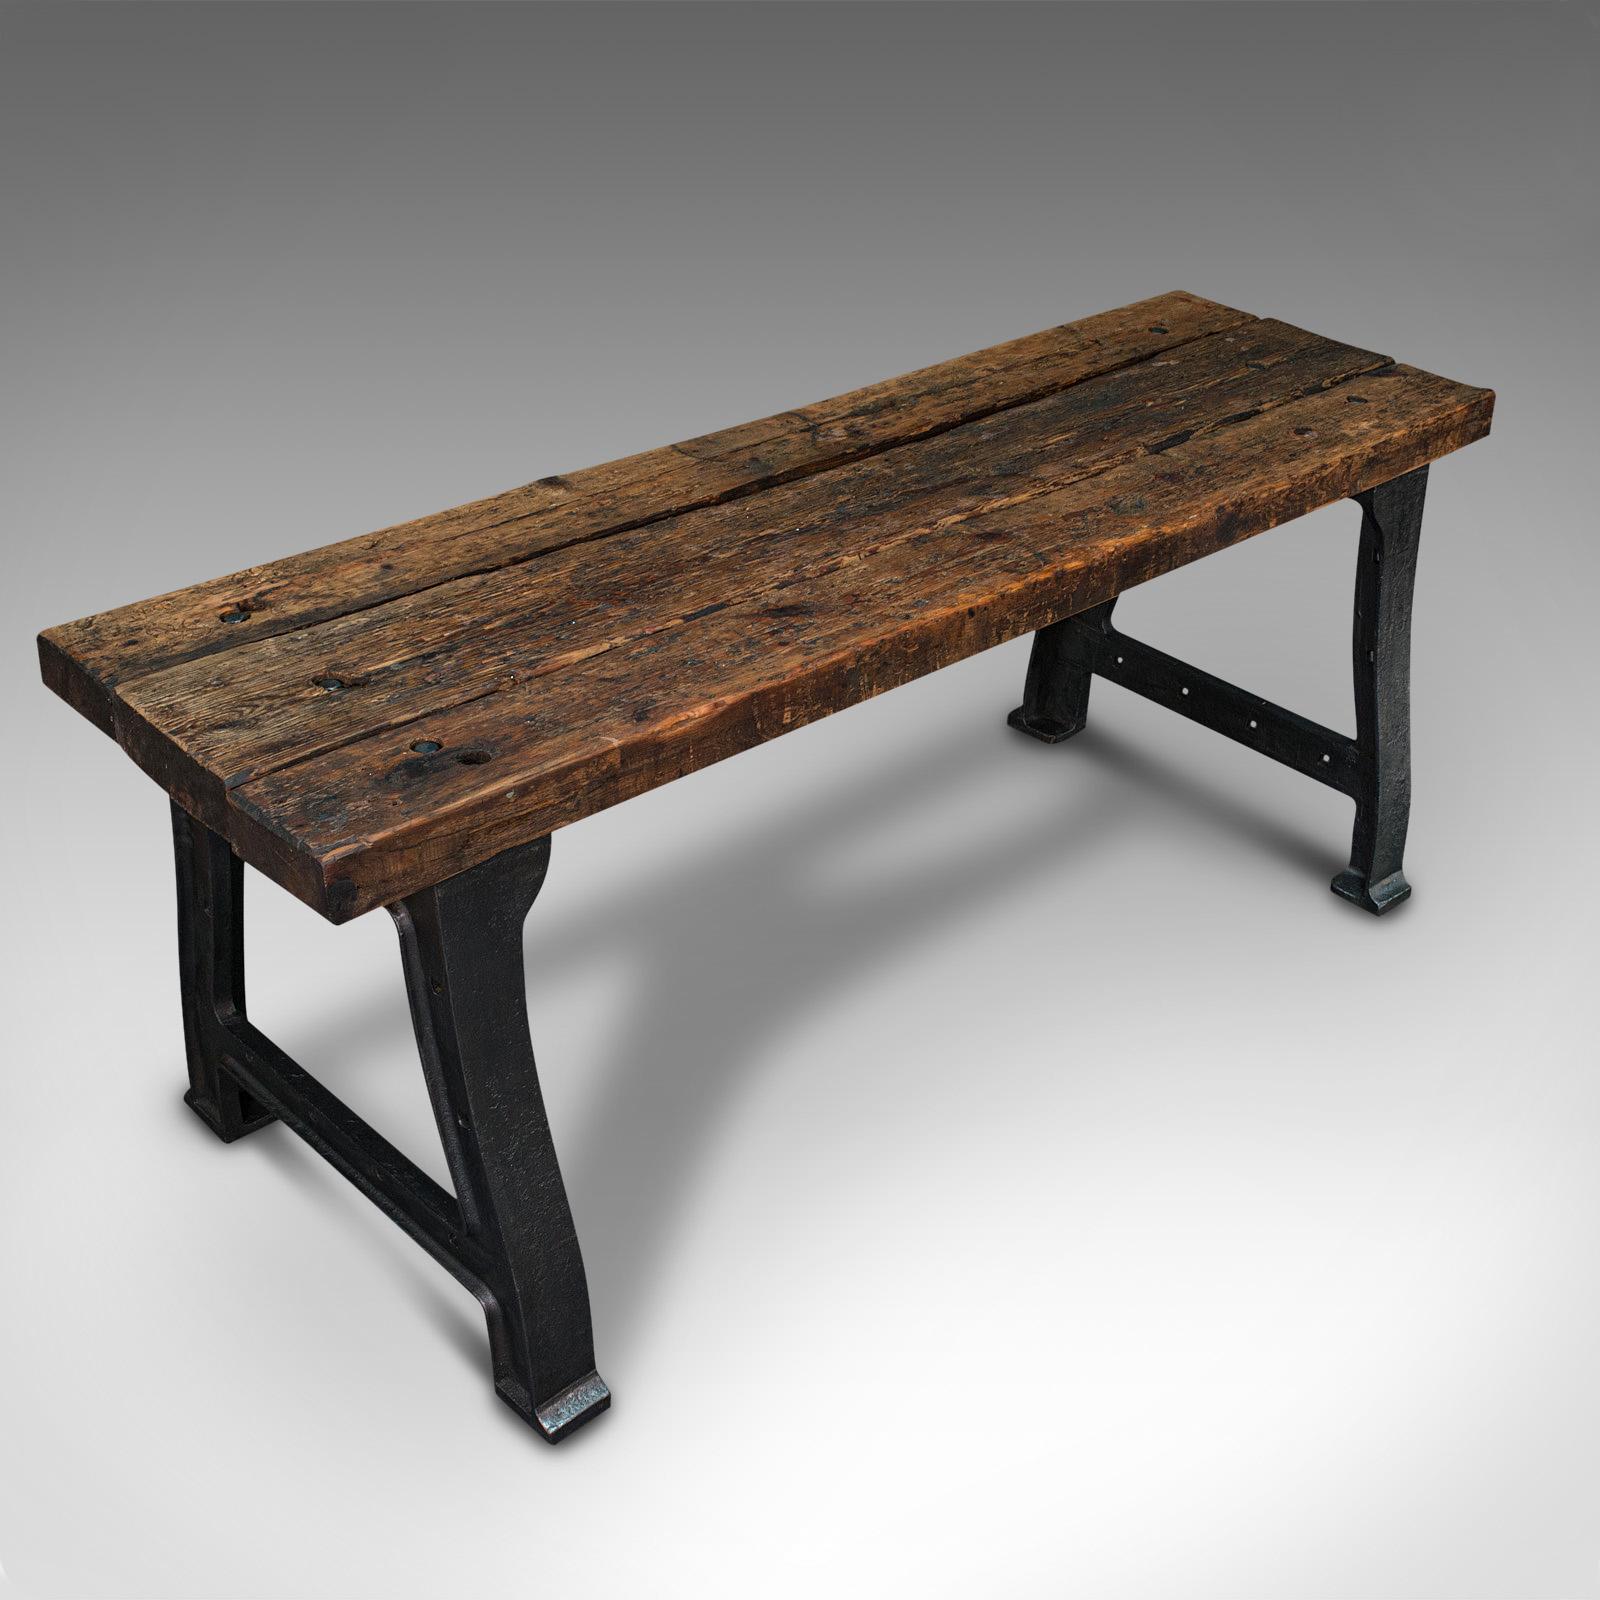 Antique Foundry Table, English, Pine, Iron, Heavy, Industrial Taste, Victorian For Sale 2